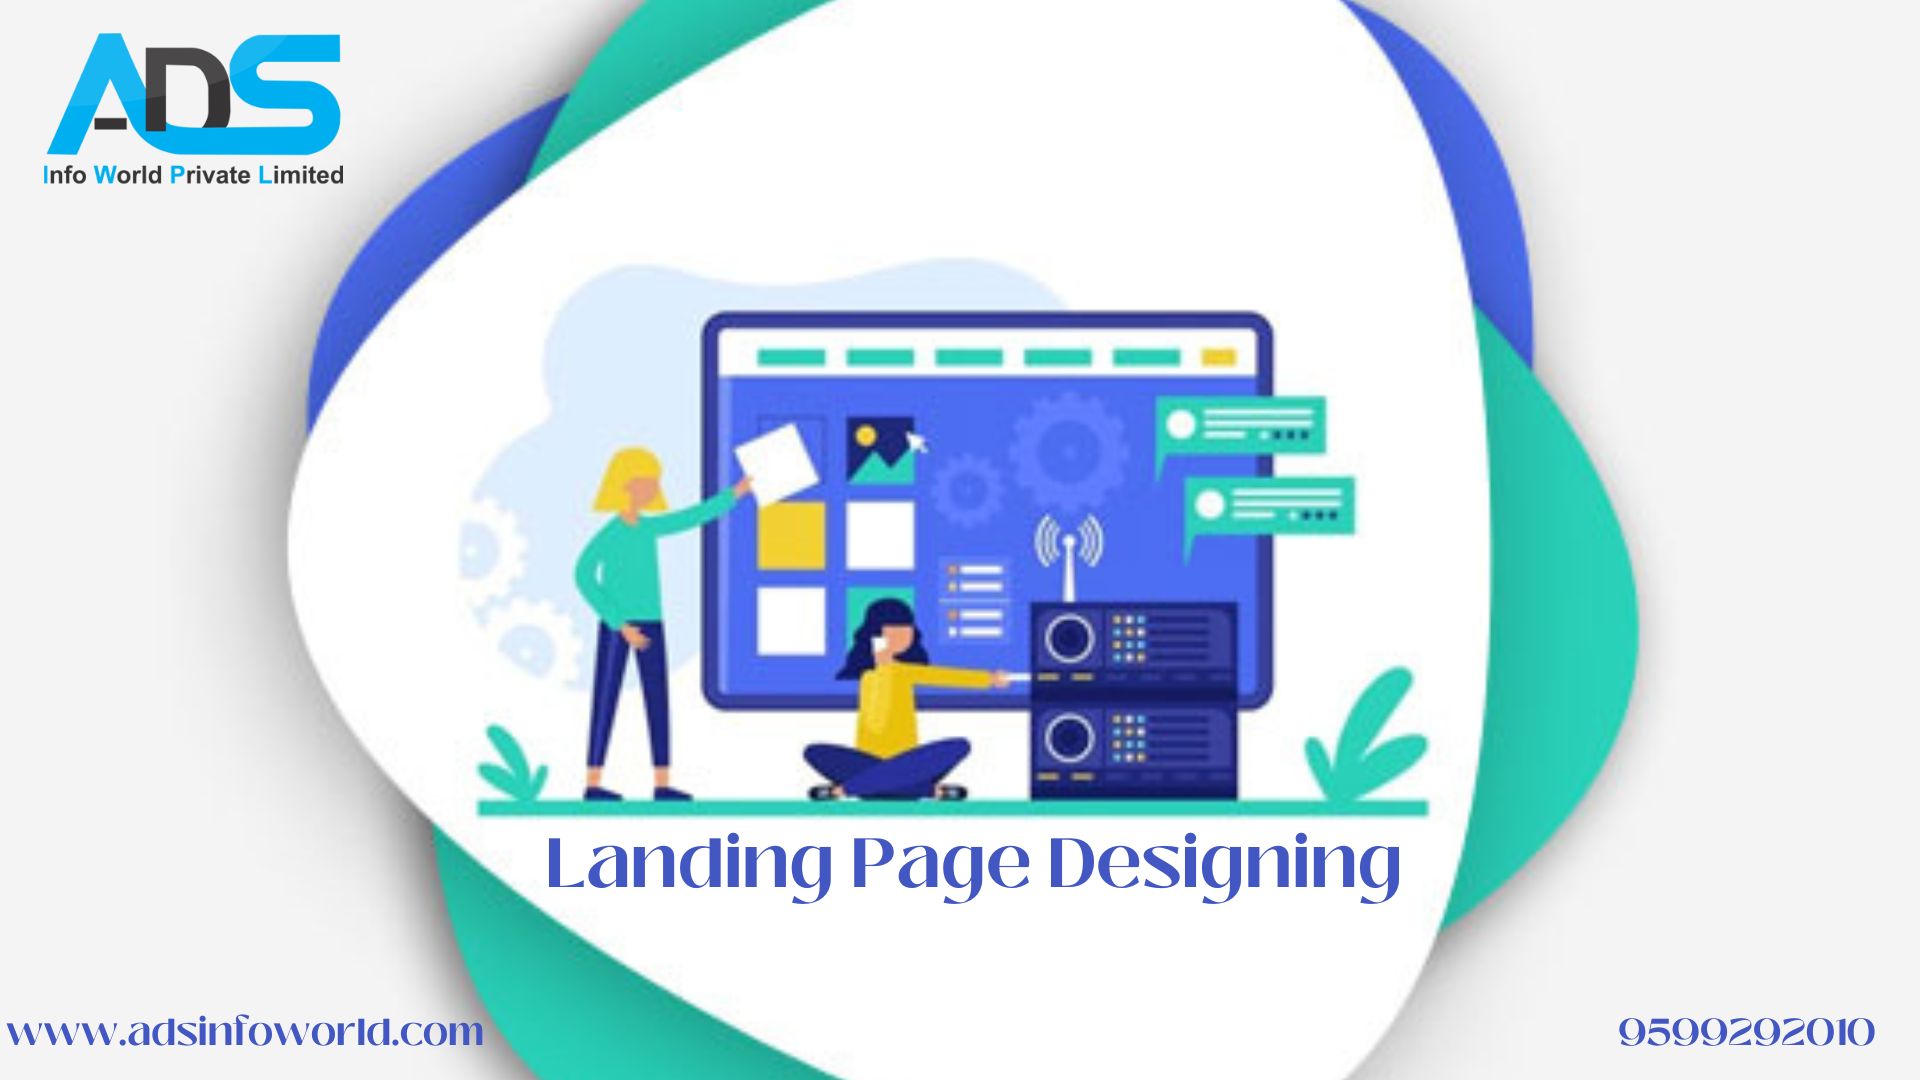 What is the importance of a landing page Website Design, and how do you make it?